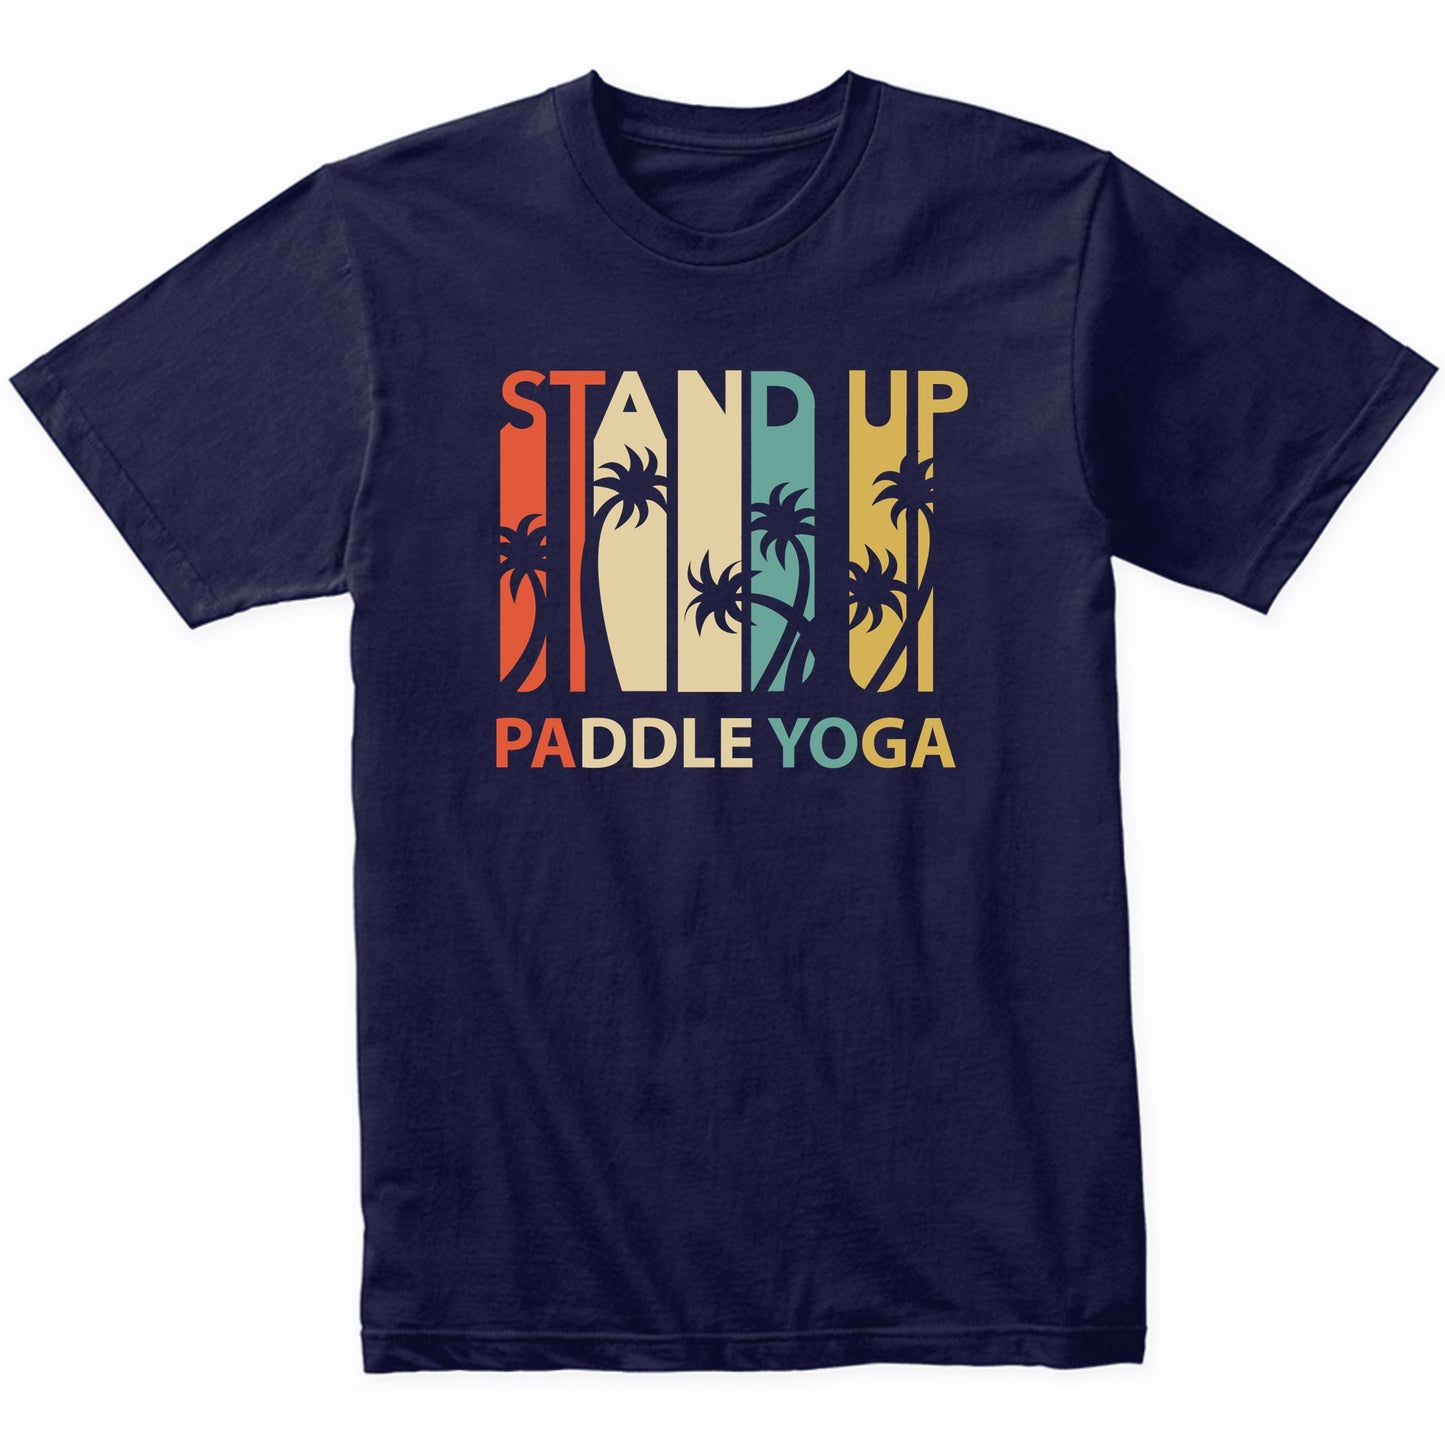 Vintage Retro 1970's Style Stand Up Paddle Yoga T-Shirt